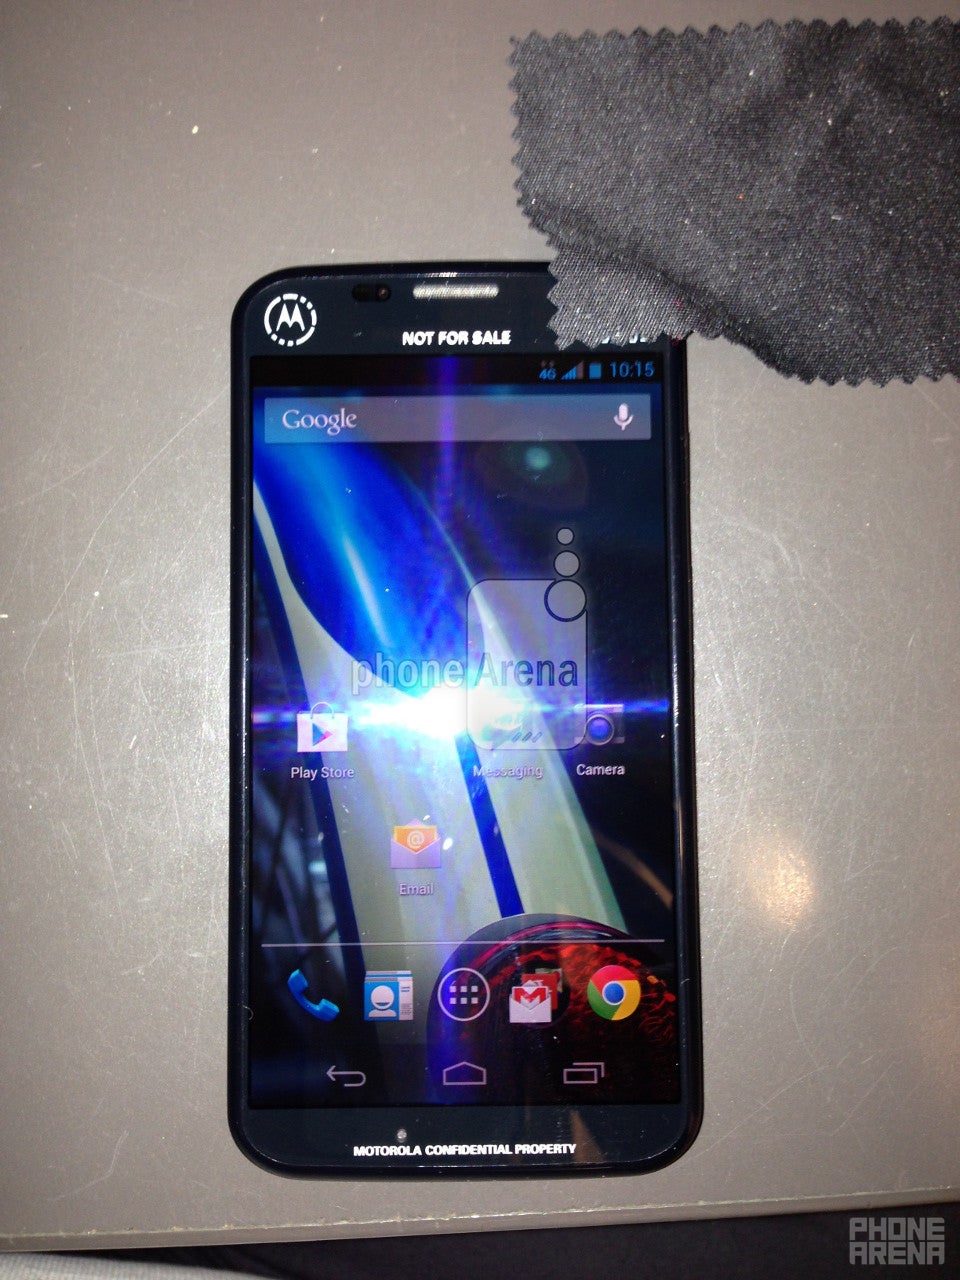 Mysterious Motorola X phone picture pops up, testing as the XT1056 on Sprint&#039;s LTE